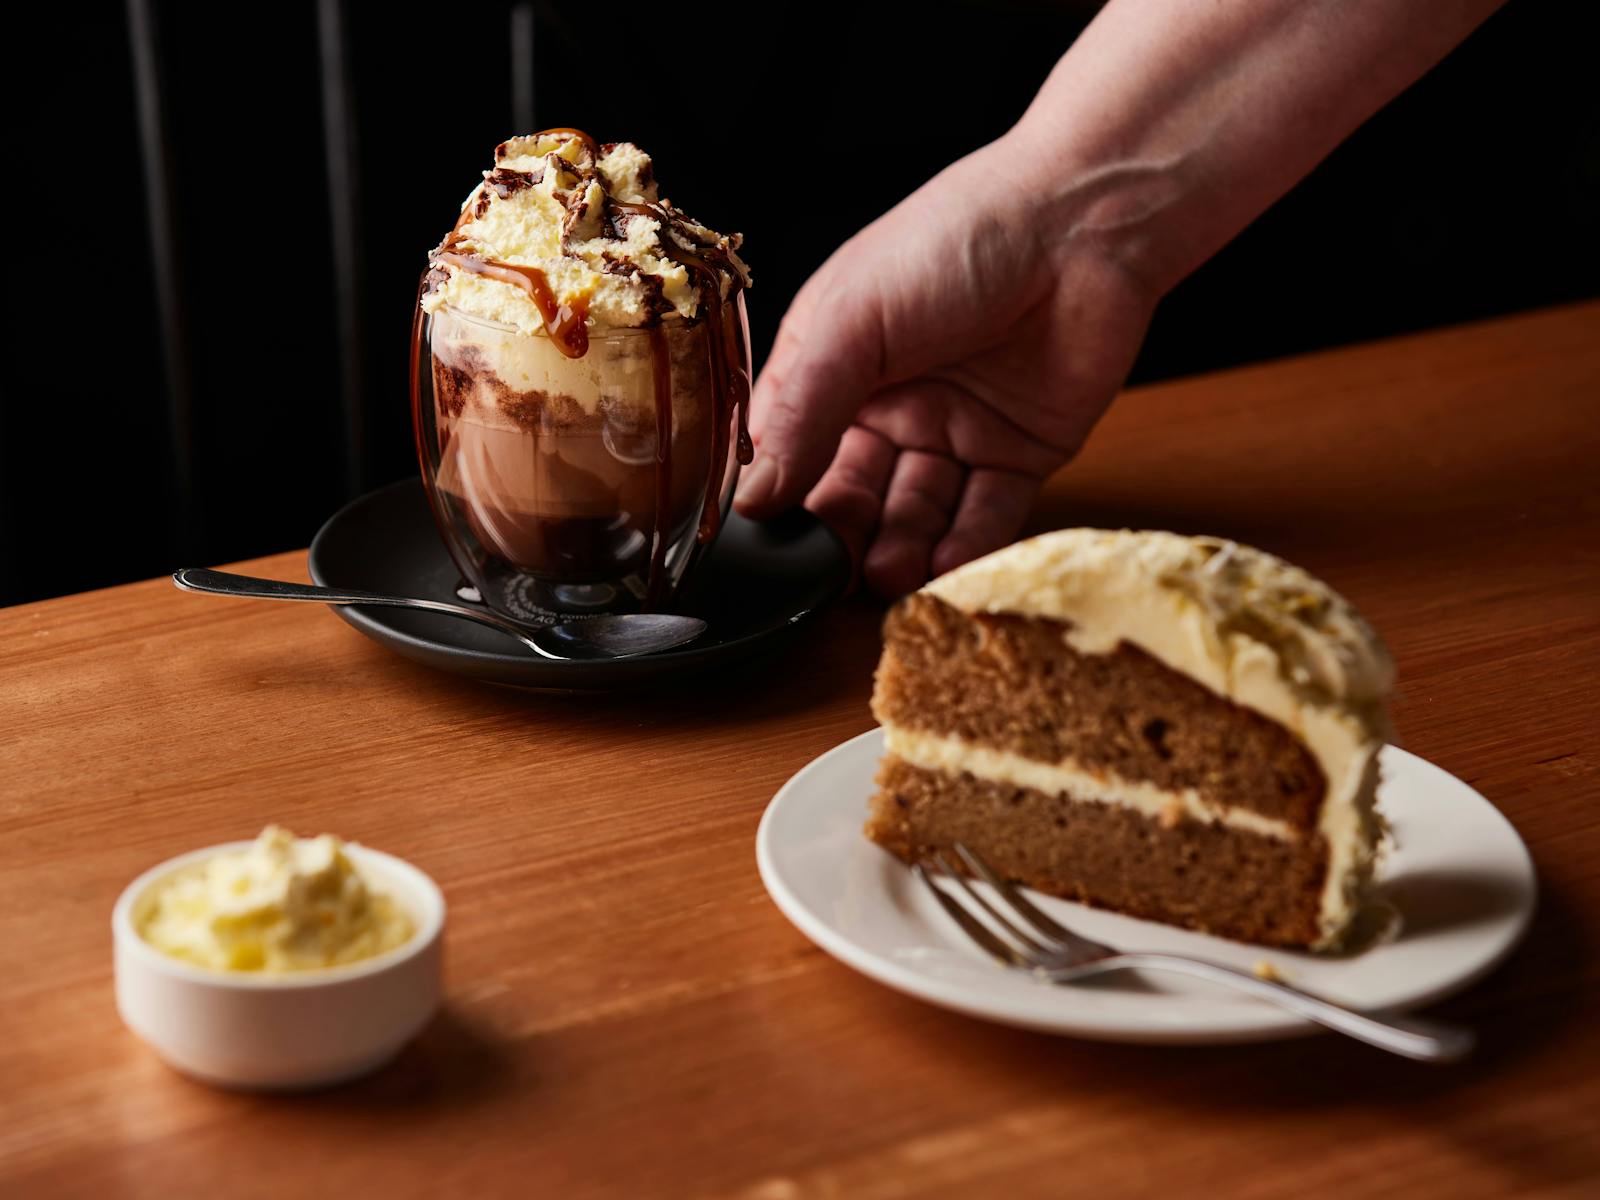 A carrot cakes topped with nuts and cream cheese sits in the foreground with a vienna coffee